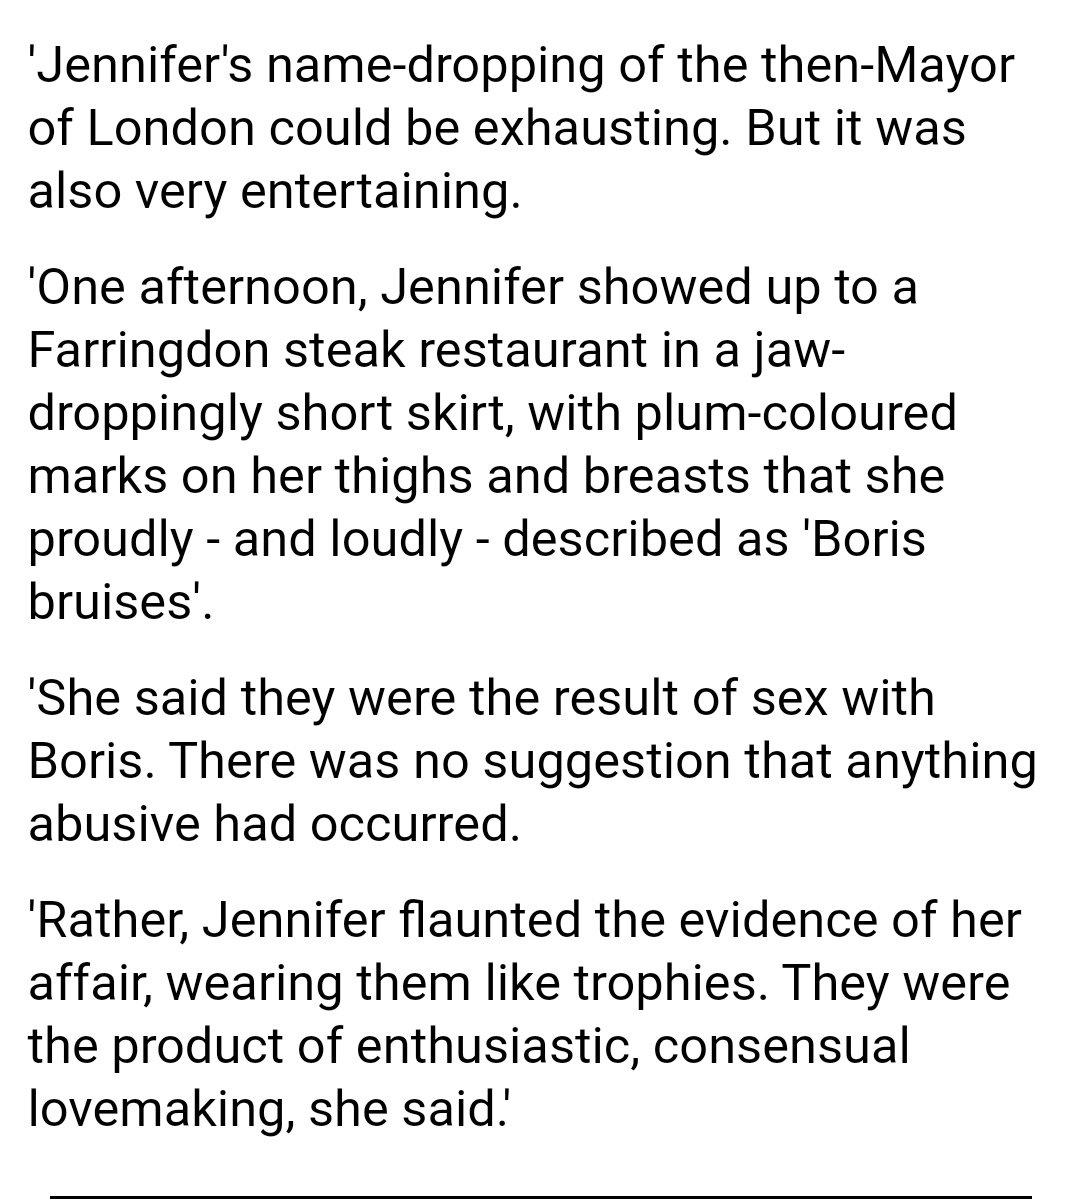 Milo blows leave Boris bruised:Arcuri's friend and far-right provocateur Yiannopoulos puts paid to BoJen's lies that they never had an intimate relationship:  https://www.dailymail.co.uk/news/article-7548215/amp/Jennifer-Arcuri-bragged-sex-Boris-Johnson-claims-Milo-Yiannopoulos.html#click=https://t.co/czIRQQQFxK